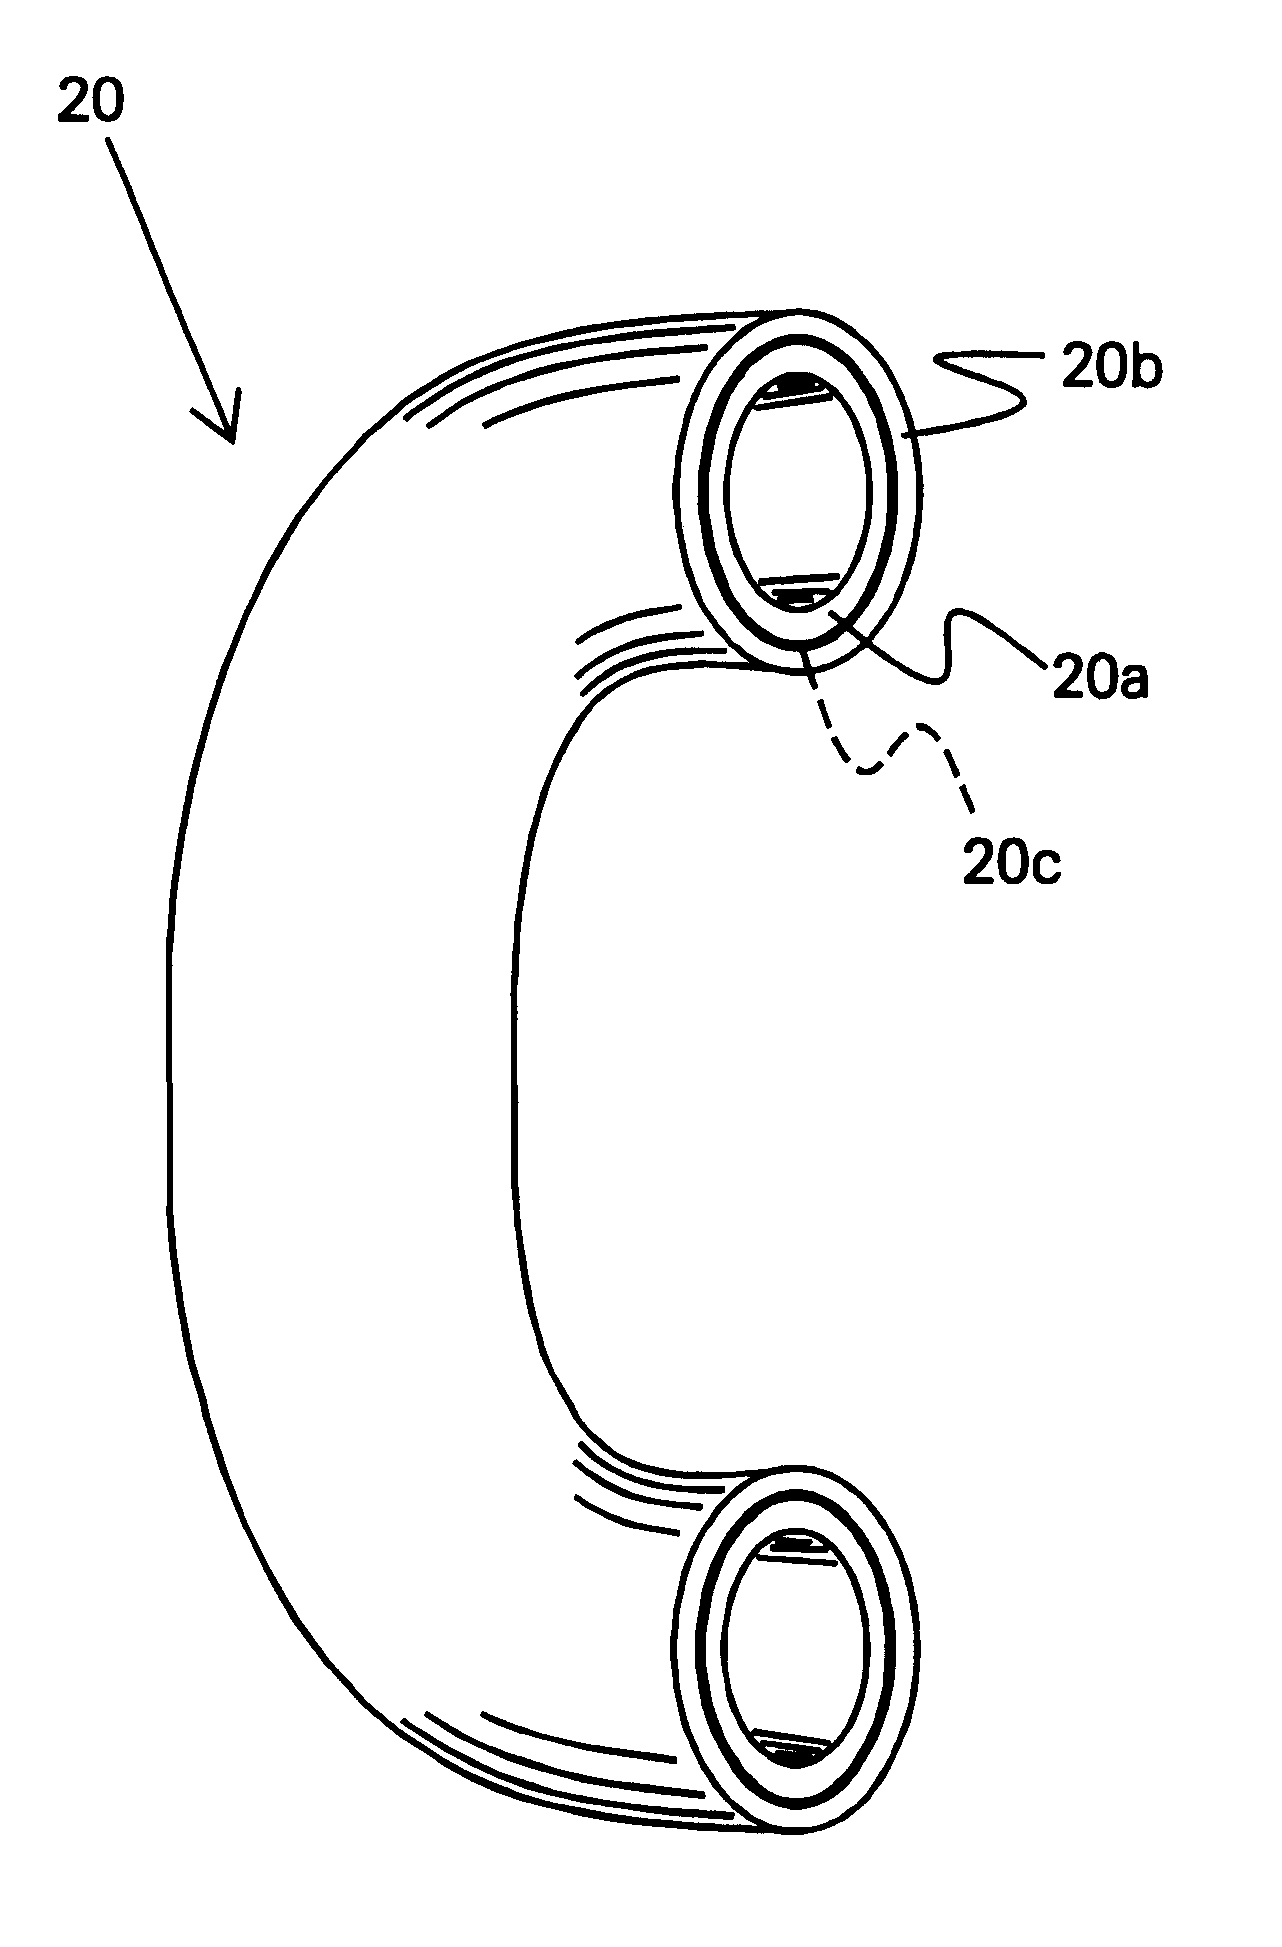 Co-extruded tubing for an off-axis ink delivery system